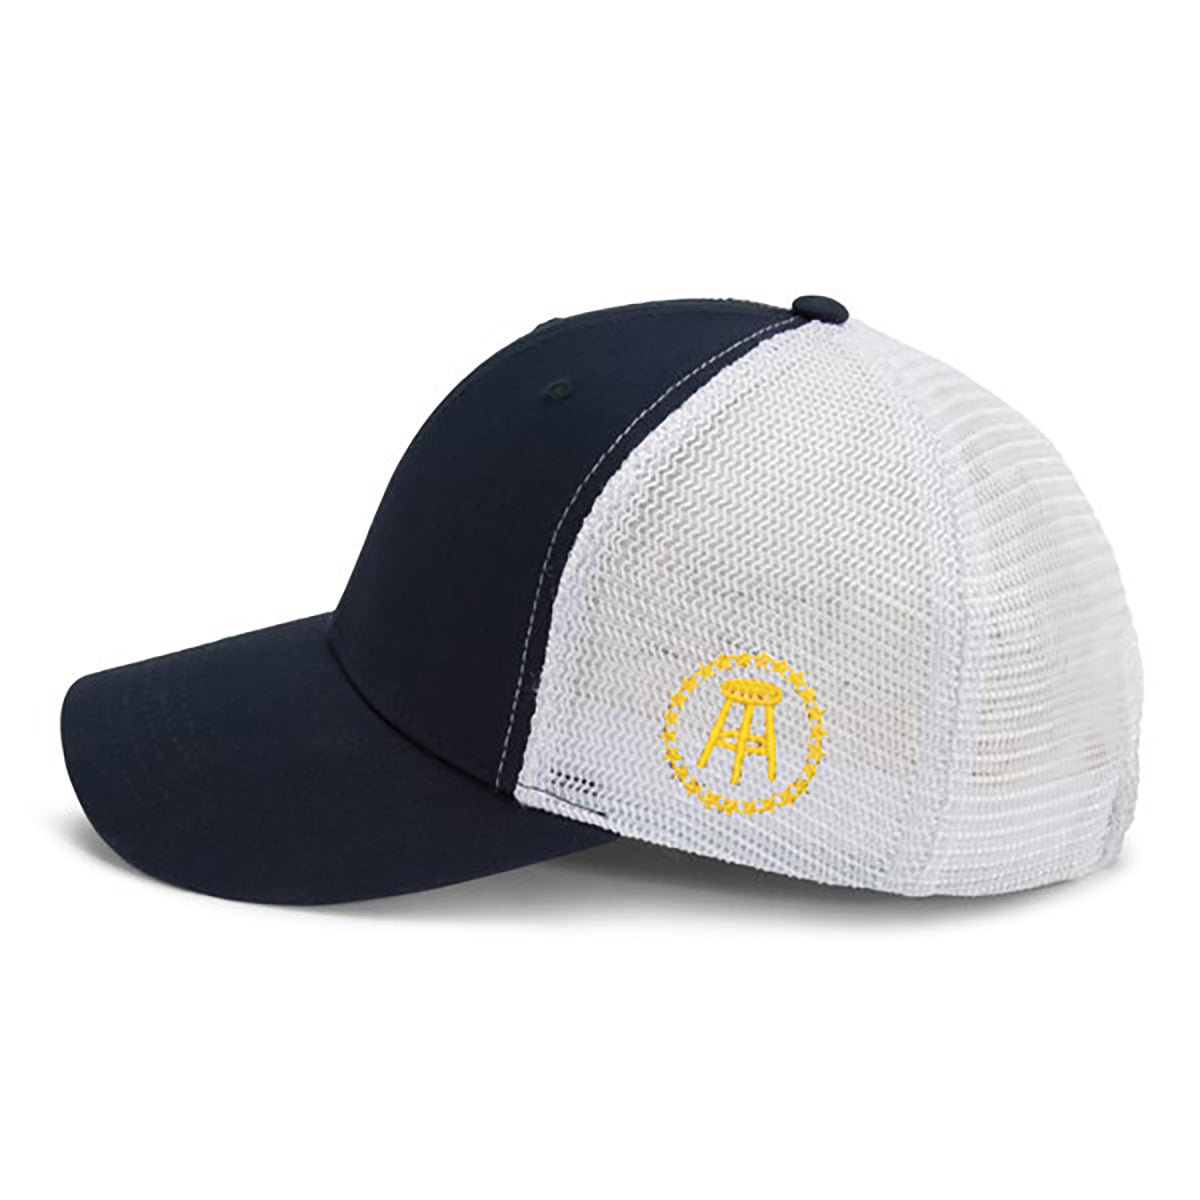 The Boys Performance Mesh Trucker Hat-Hats-Bussin With The Boys-One Size-Navy-Barstool Sports